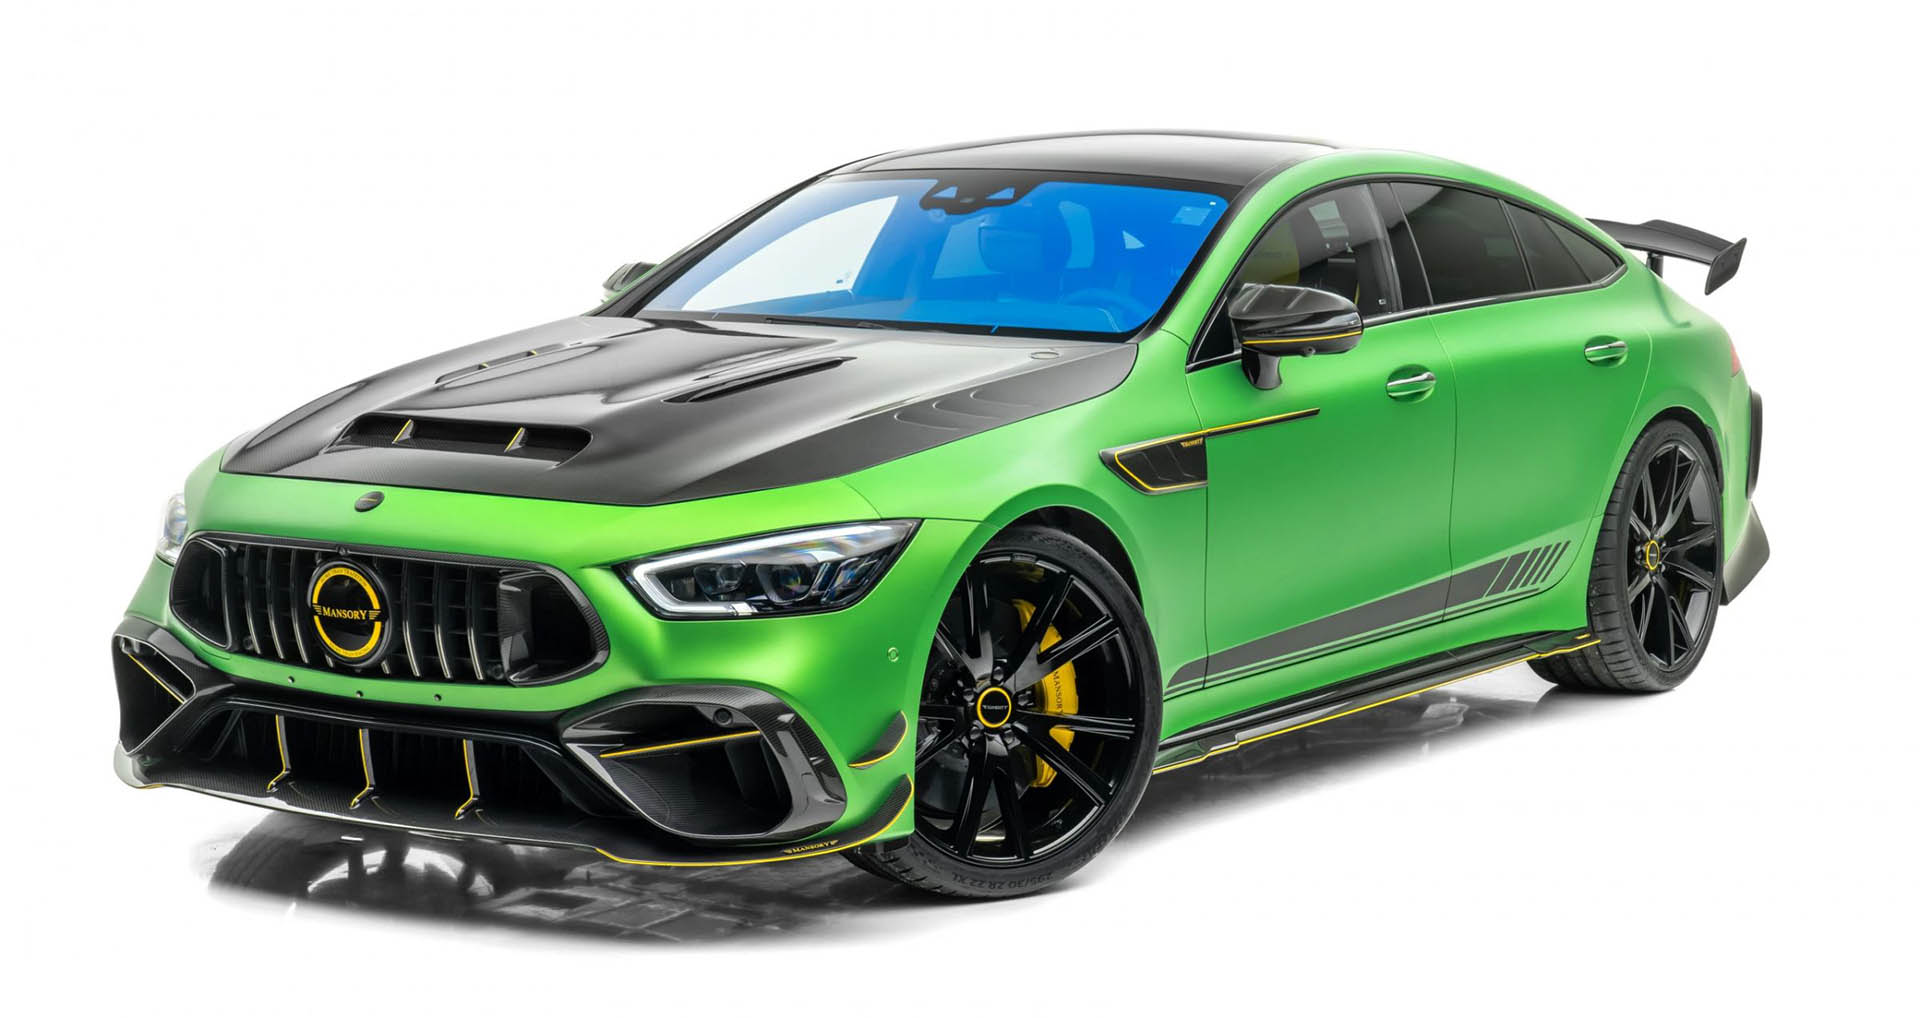 Mansory Mercedes-AMG GT 63 S E PERFORMANCE